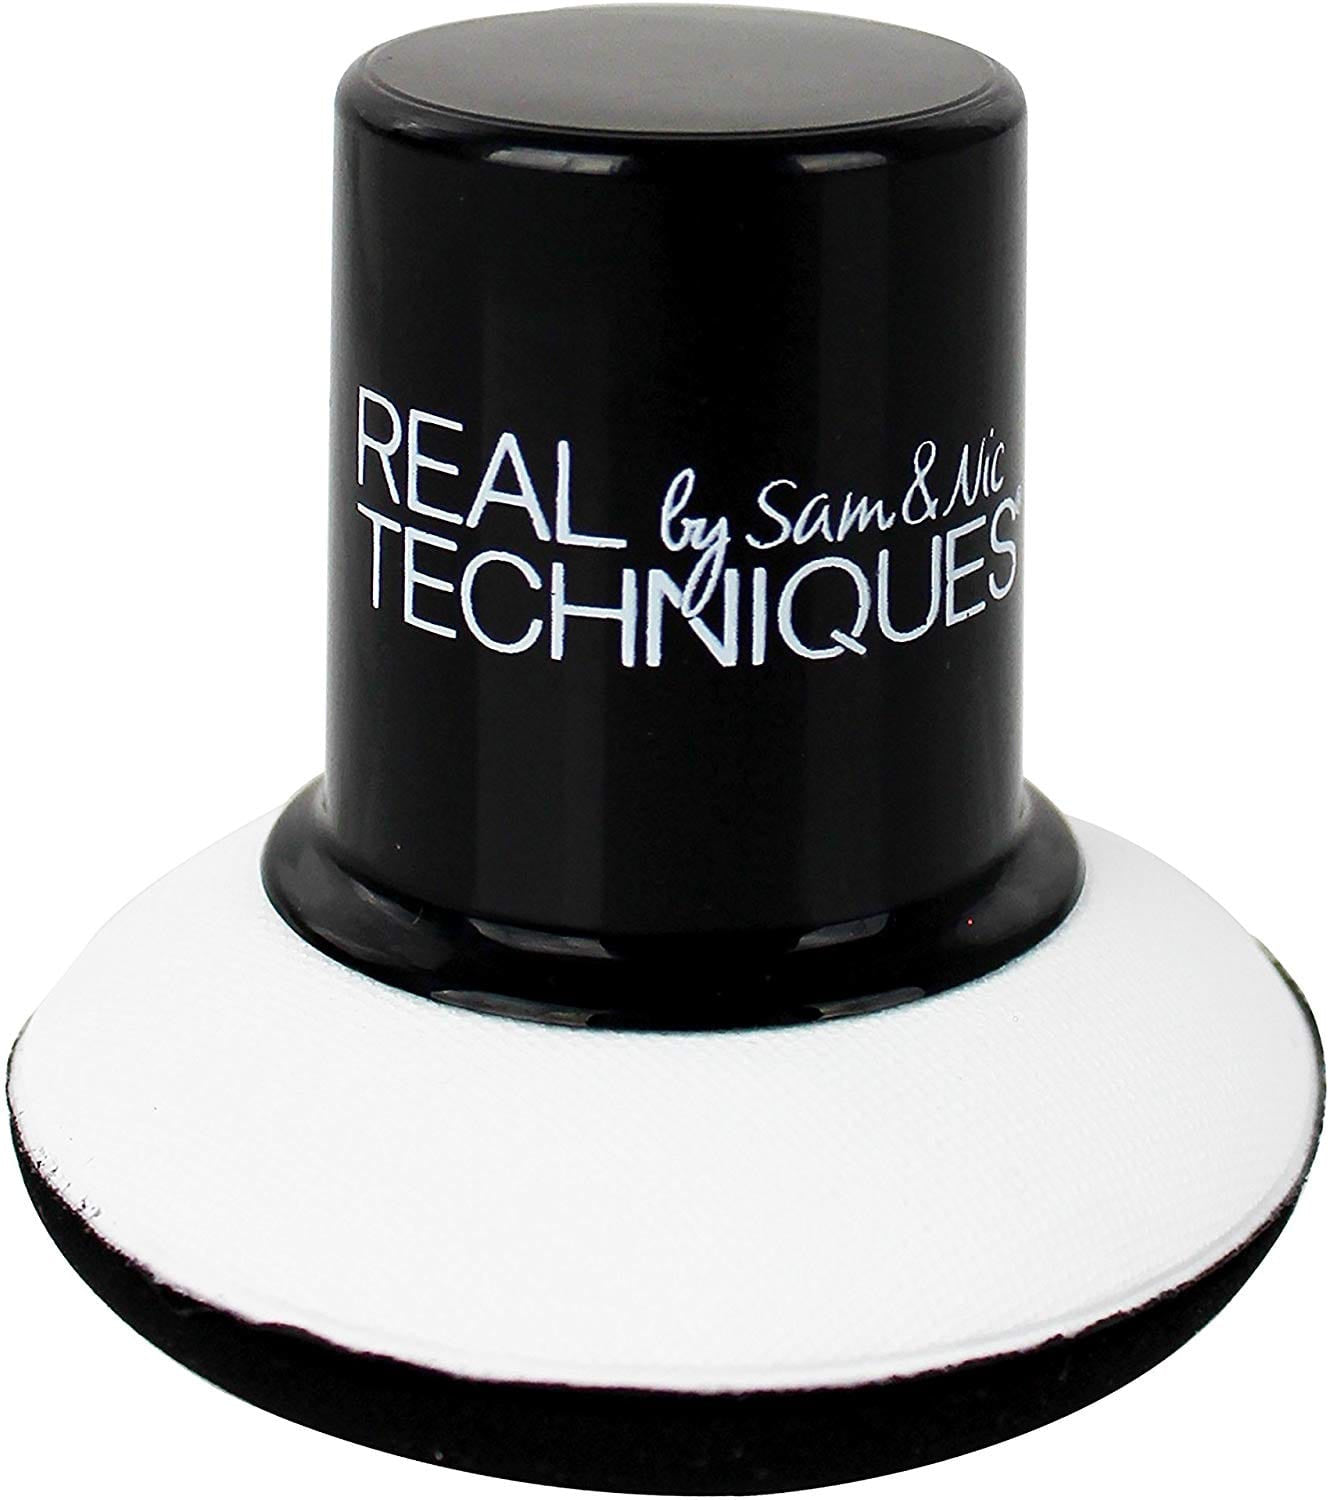 Real Techniques Expert Air Cushion Compact Make Up Sponge